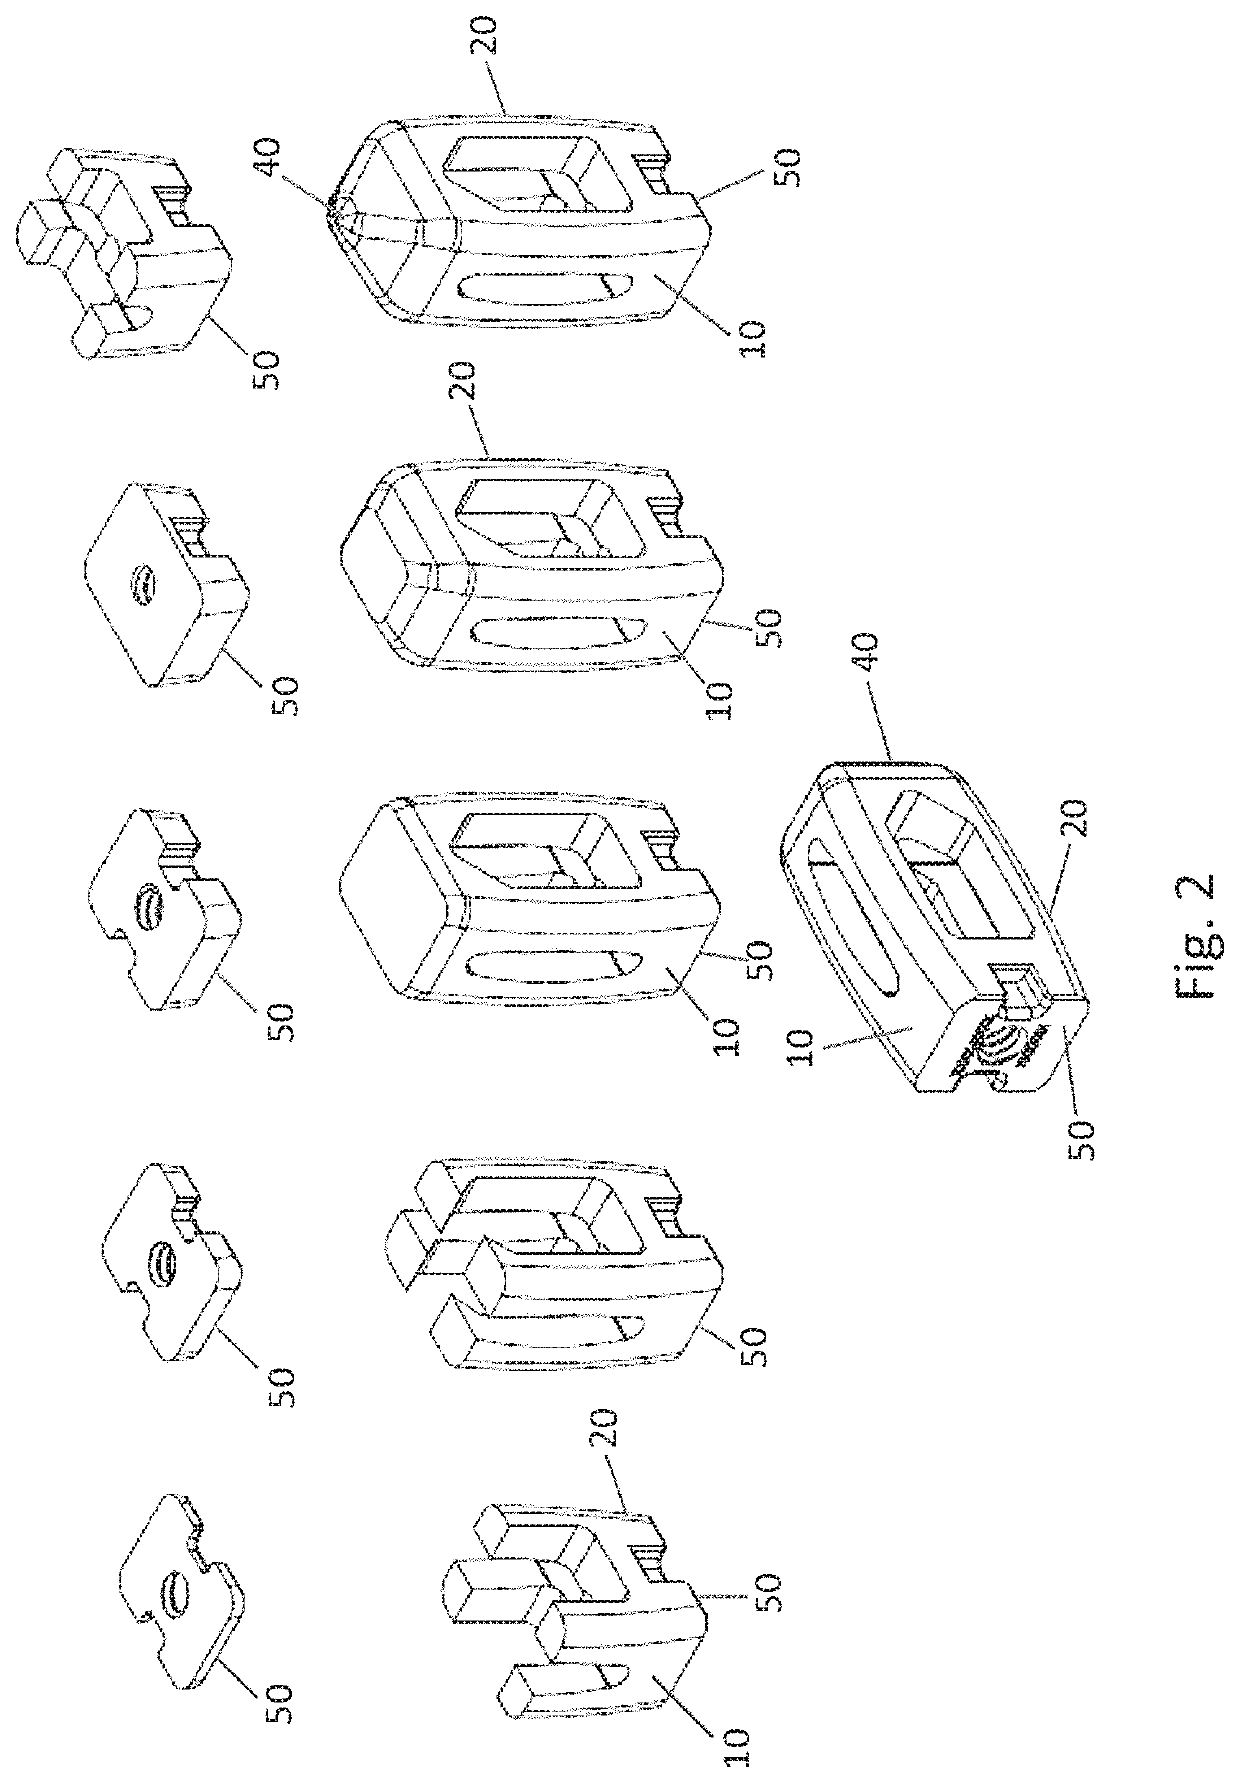 Processes for additively manufacturing orthopedic implants